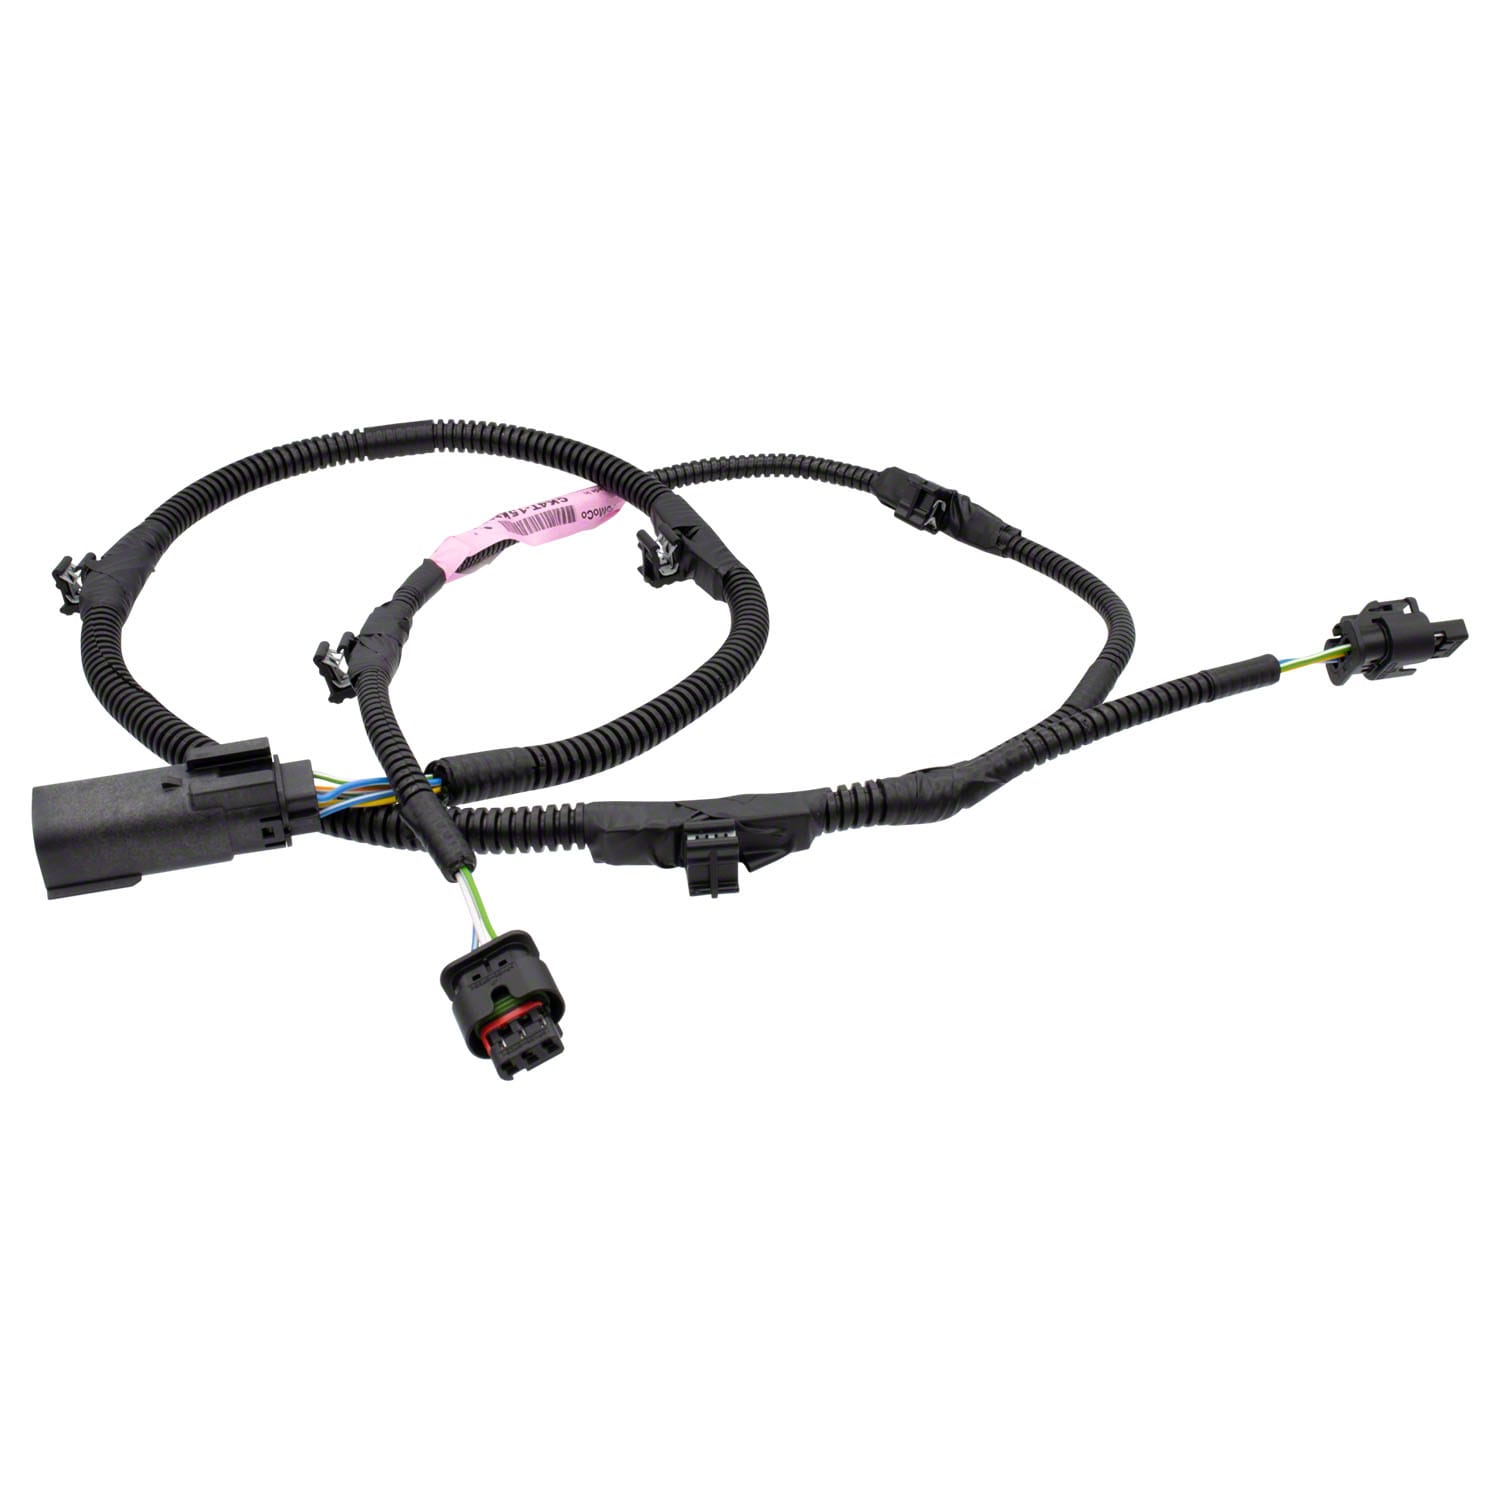 Genuine Ford Trailer Tow Wiring Harness With Park Sensors - KB3Z-15K868-D